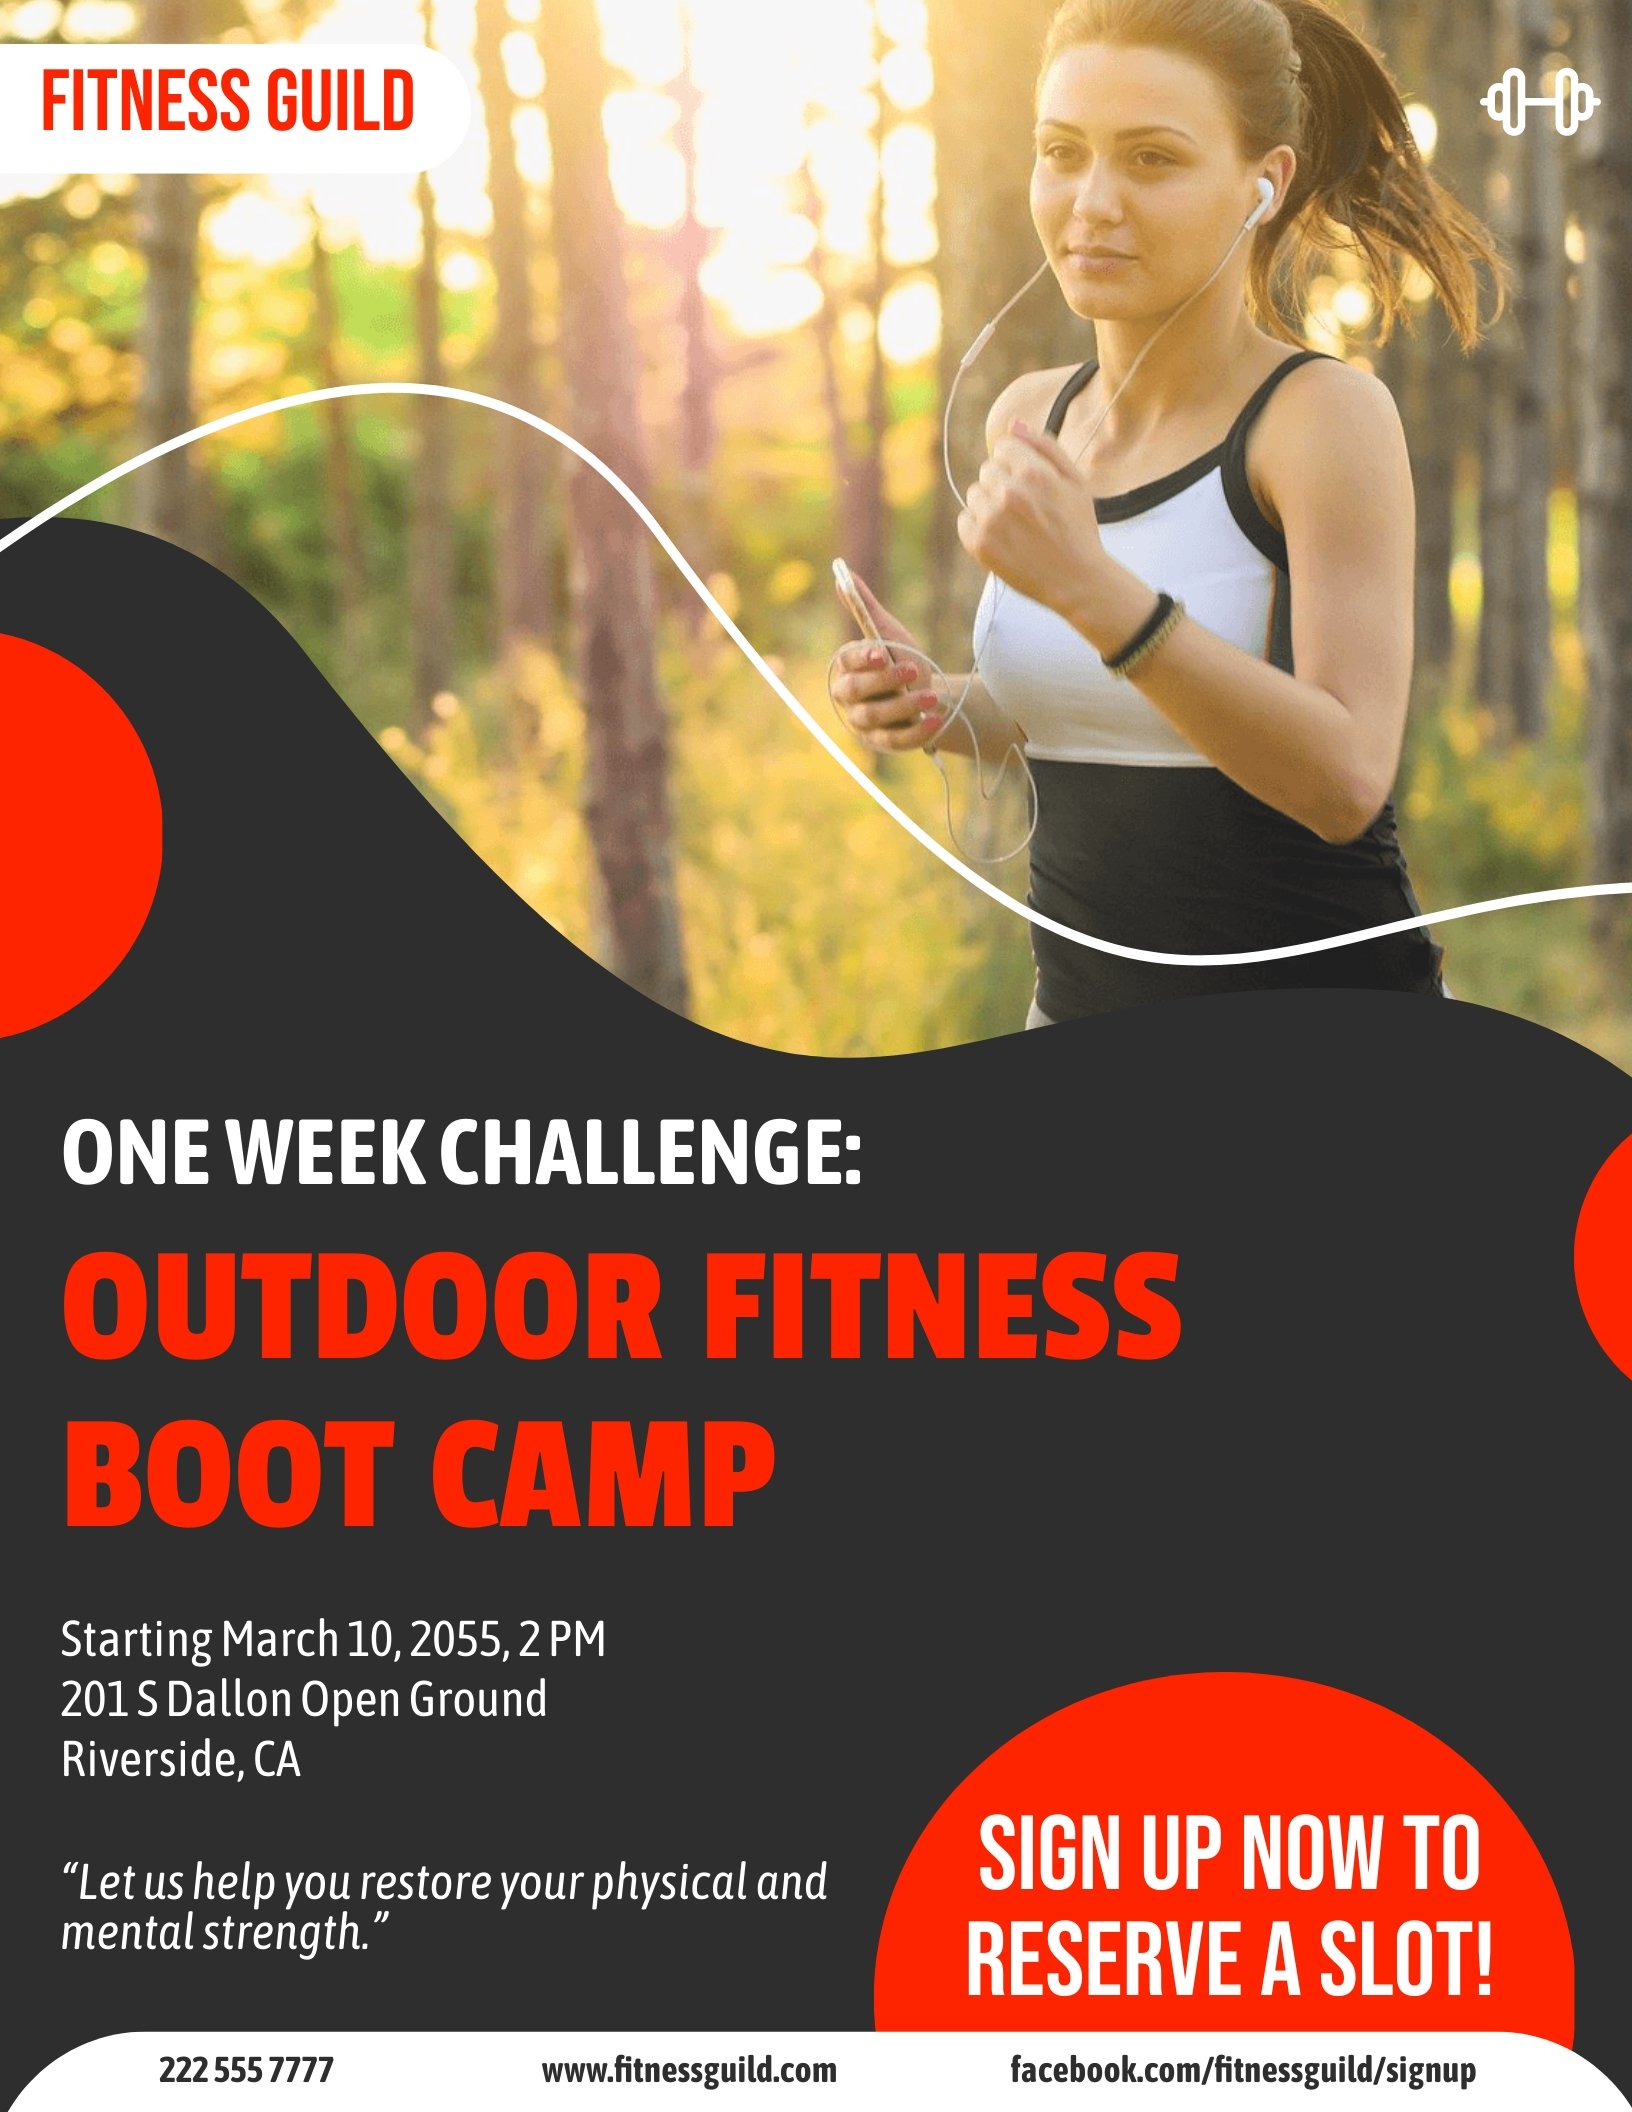 Outdoor Boot Camp Flyer in Word, Google Docs, Illustrator, PSD, Apple Pages, Publisher